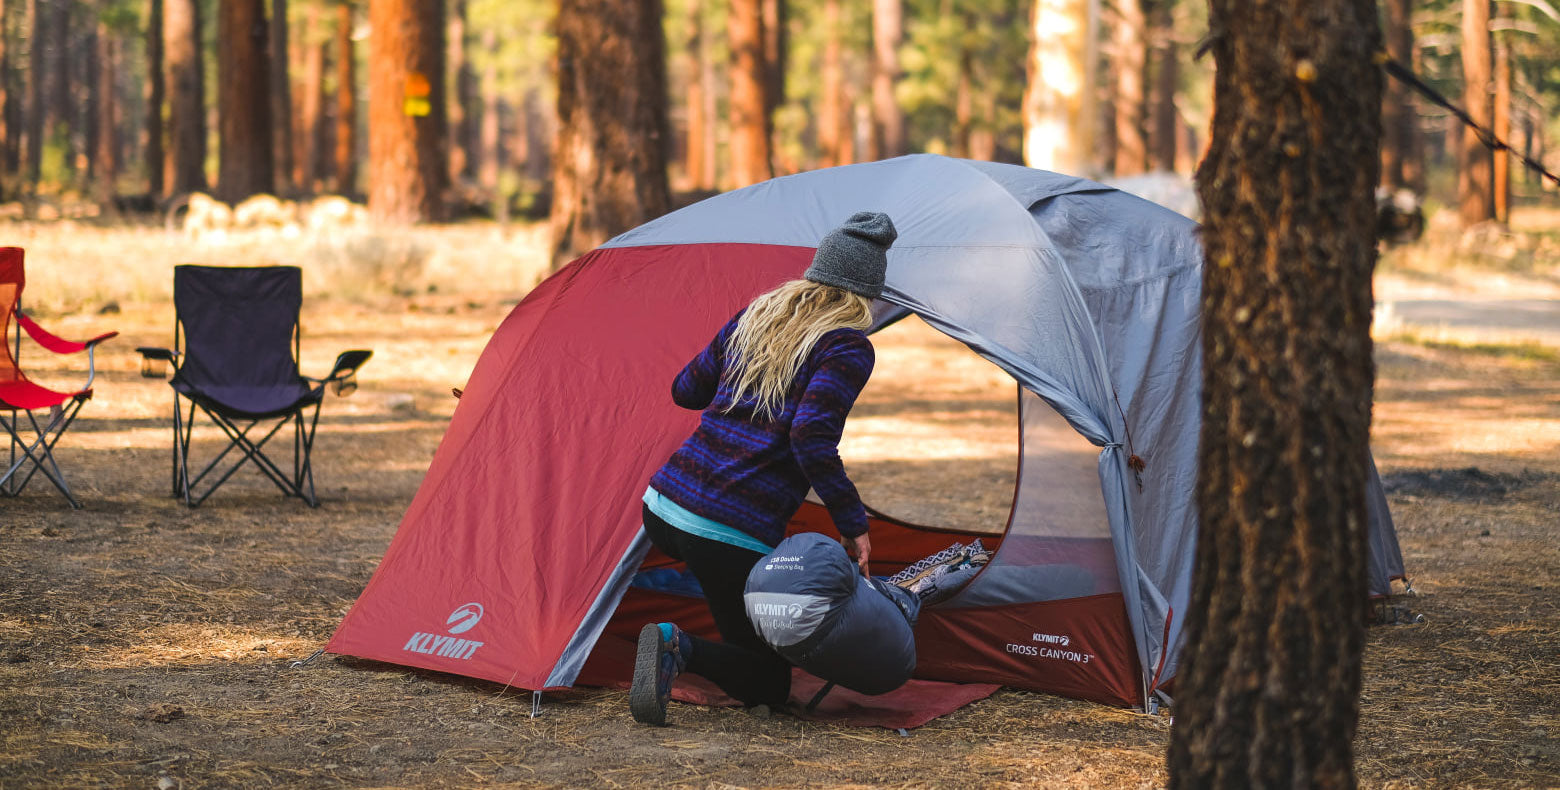 From Novice To Newly Prepared: What You Need To Know To Plan Your First Camping Trip